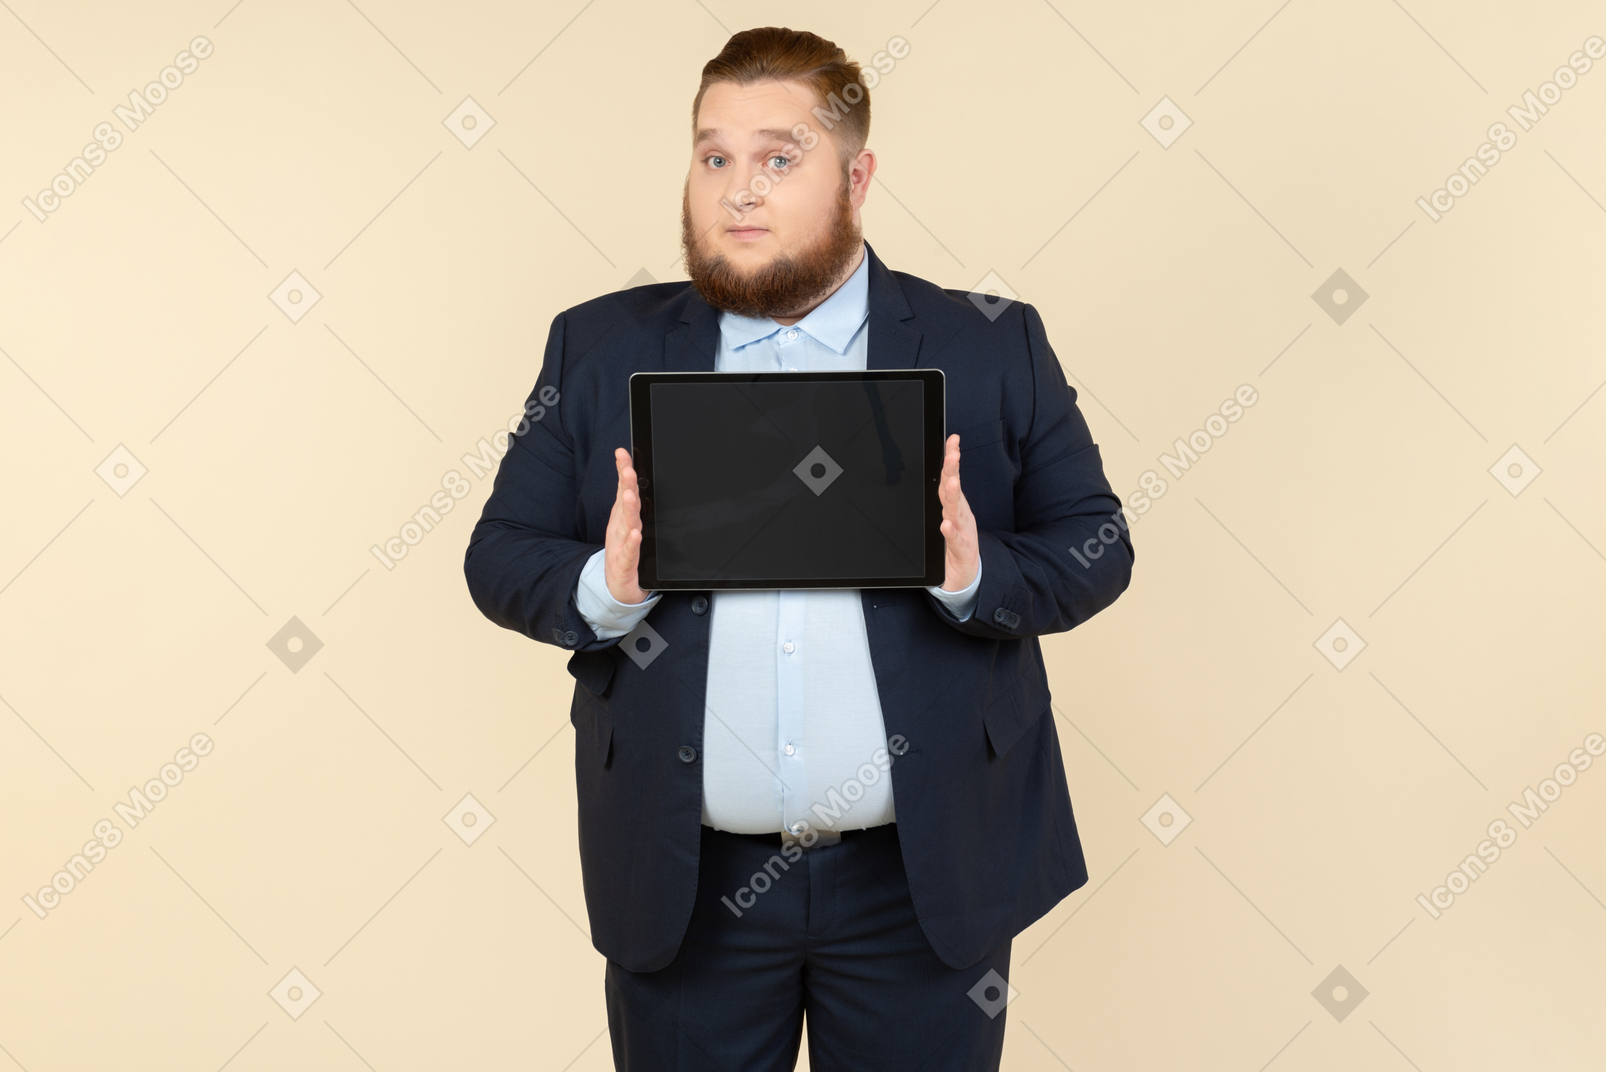 Young overweight office worker showing digital tablet